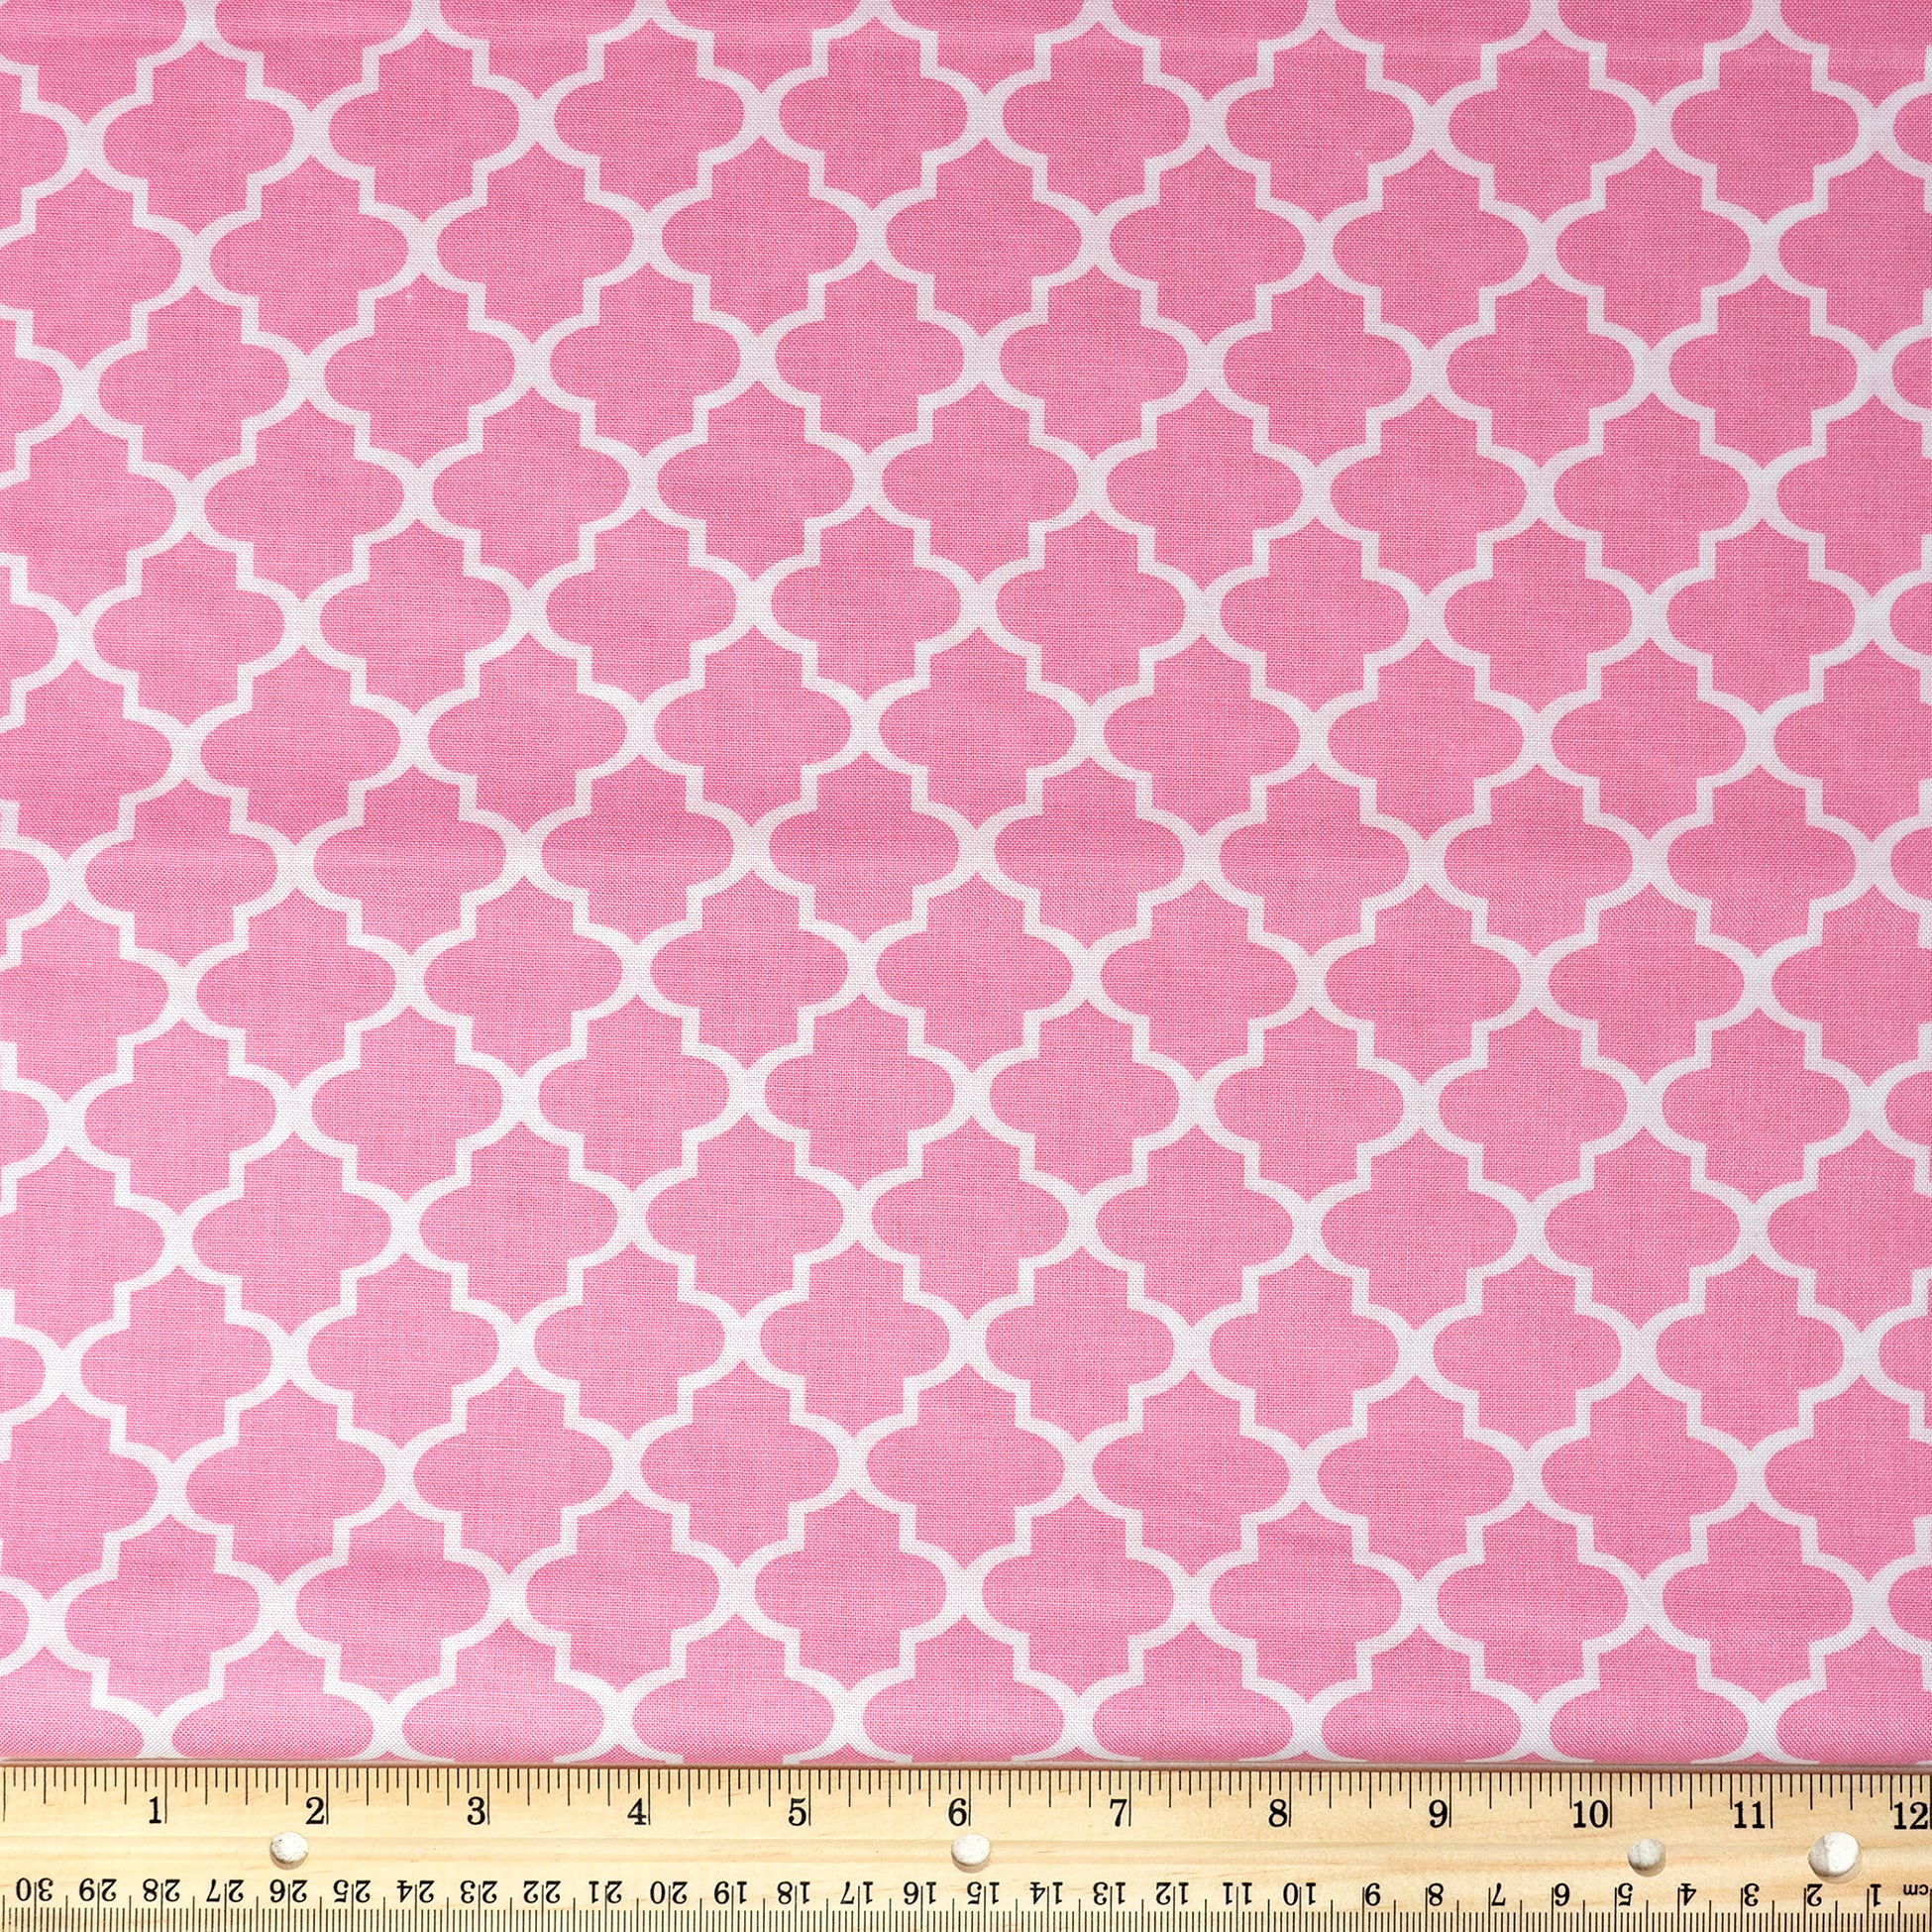 Waverly Inspirations Cotton 44" Twist Carnation Color Sewing Fabric by the Yard